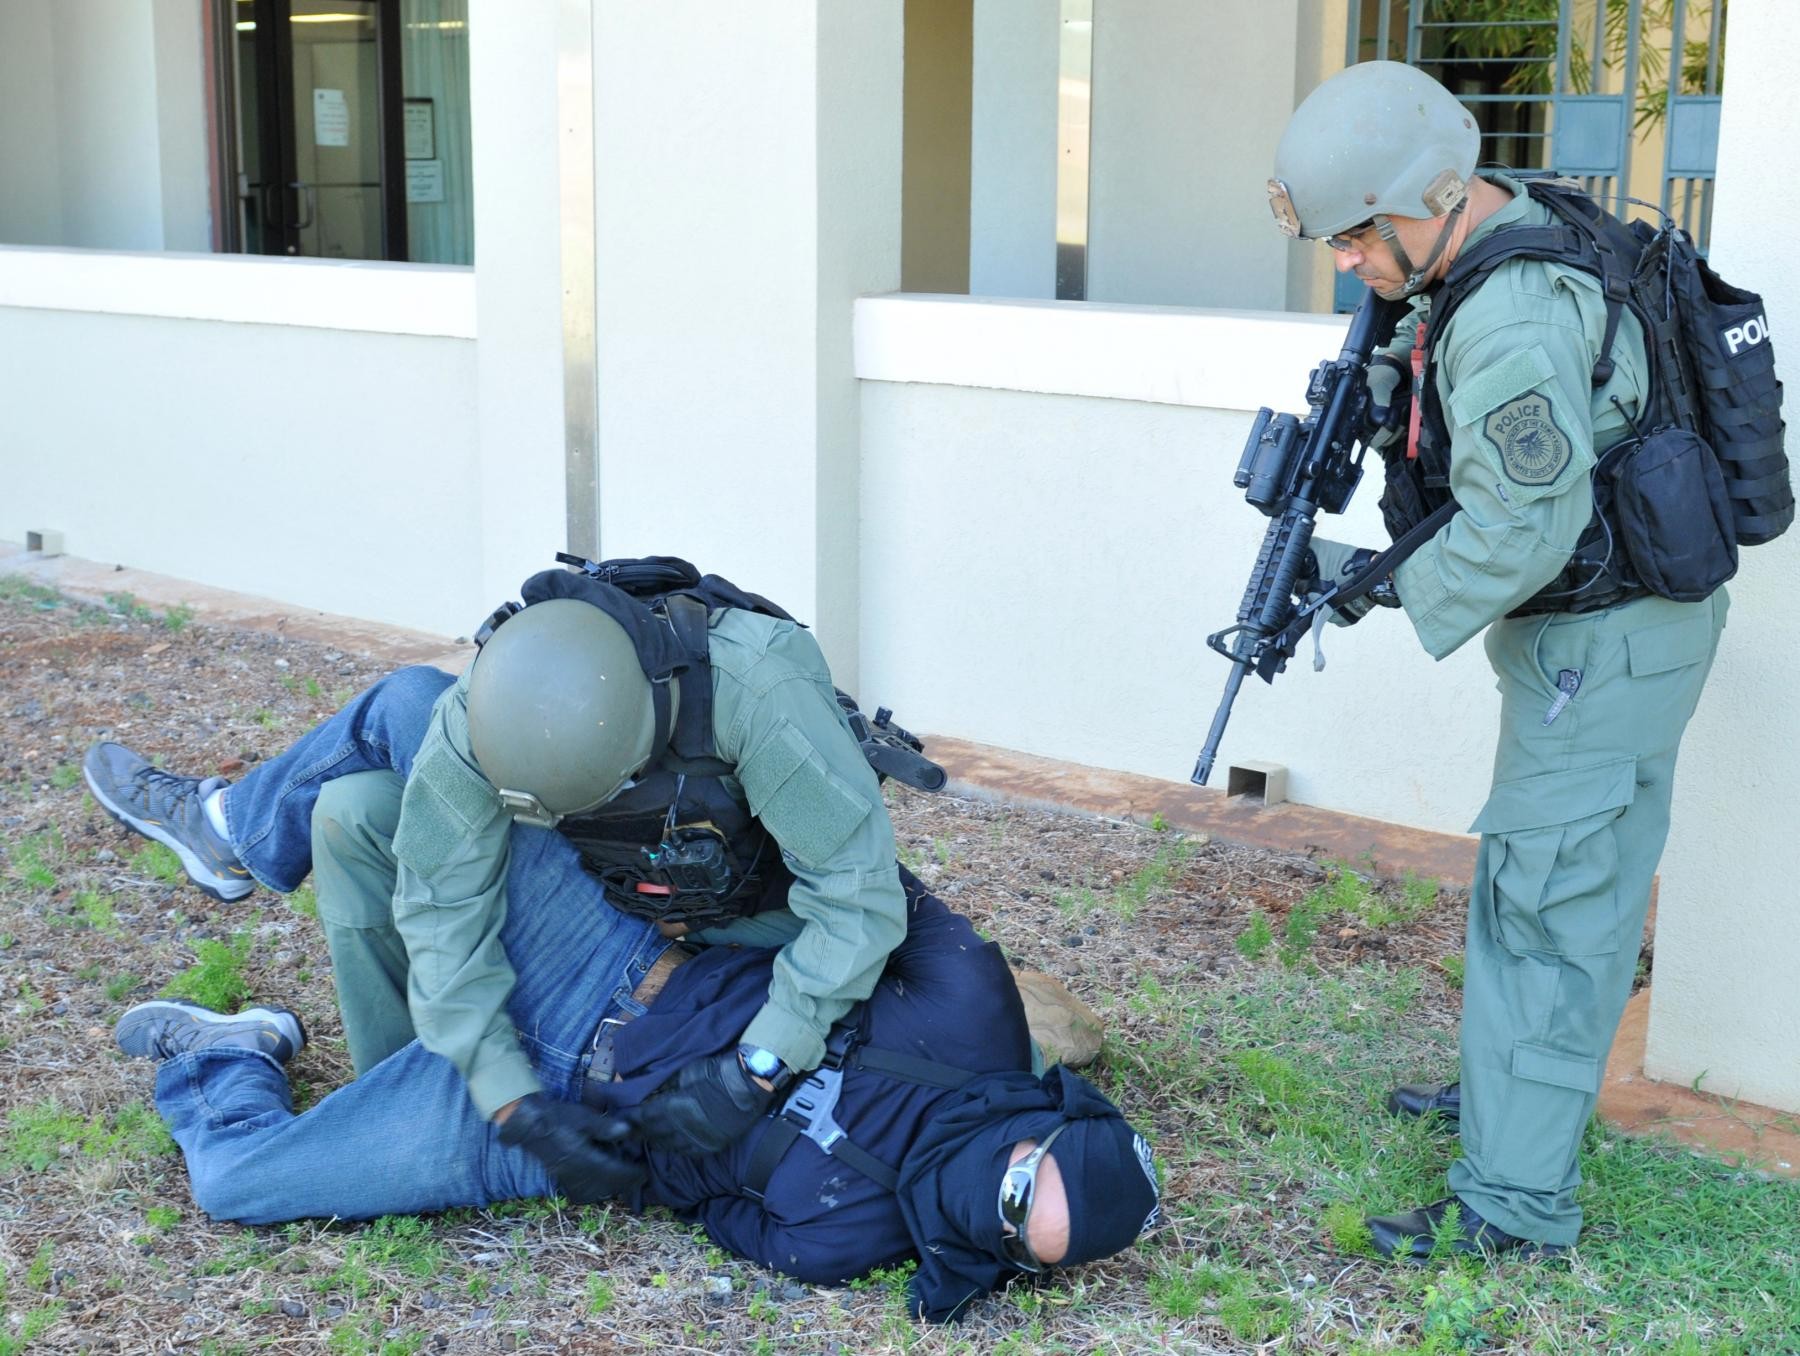 Special Reaction Team trains on antiterrorism | Article | The United States Army1800 x 1356